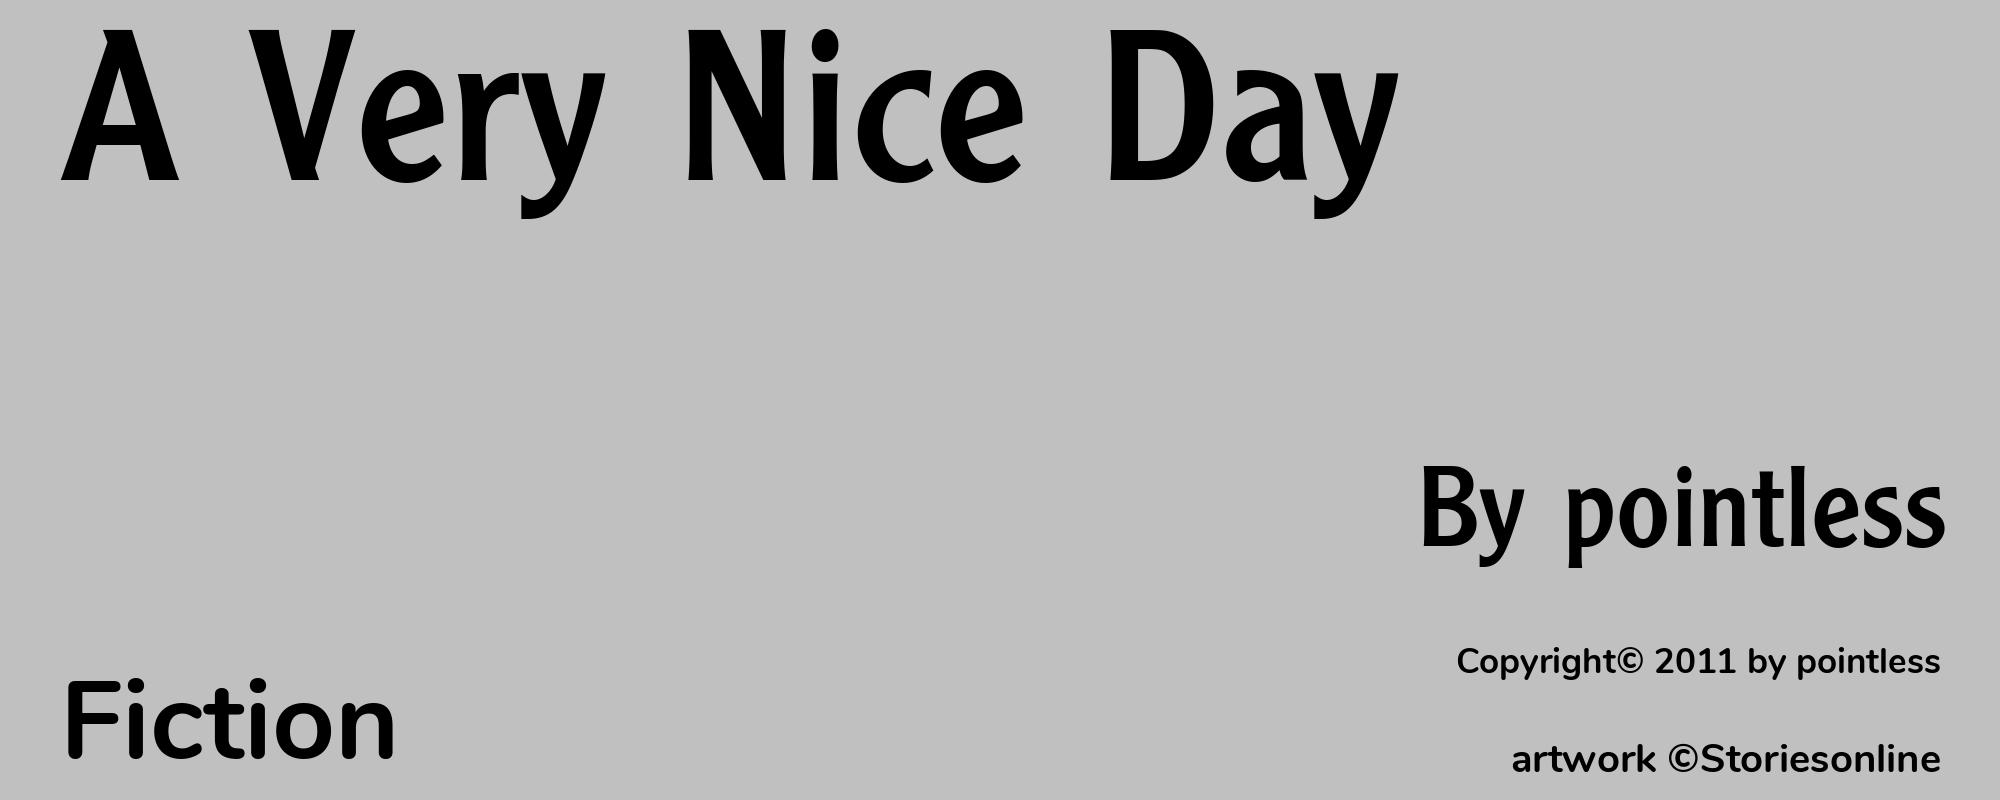 A Very Nice Day - Cover